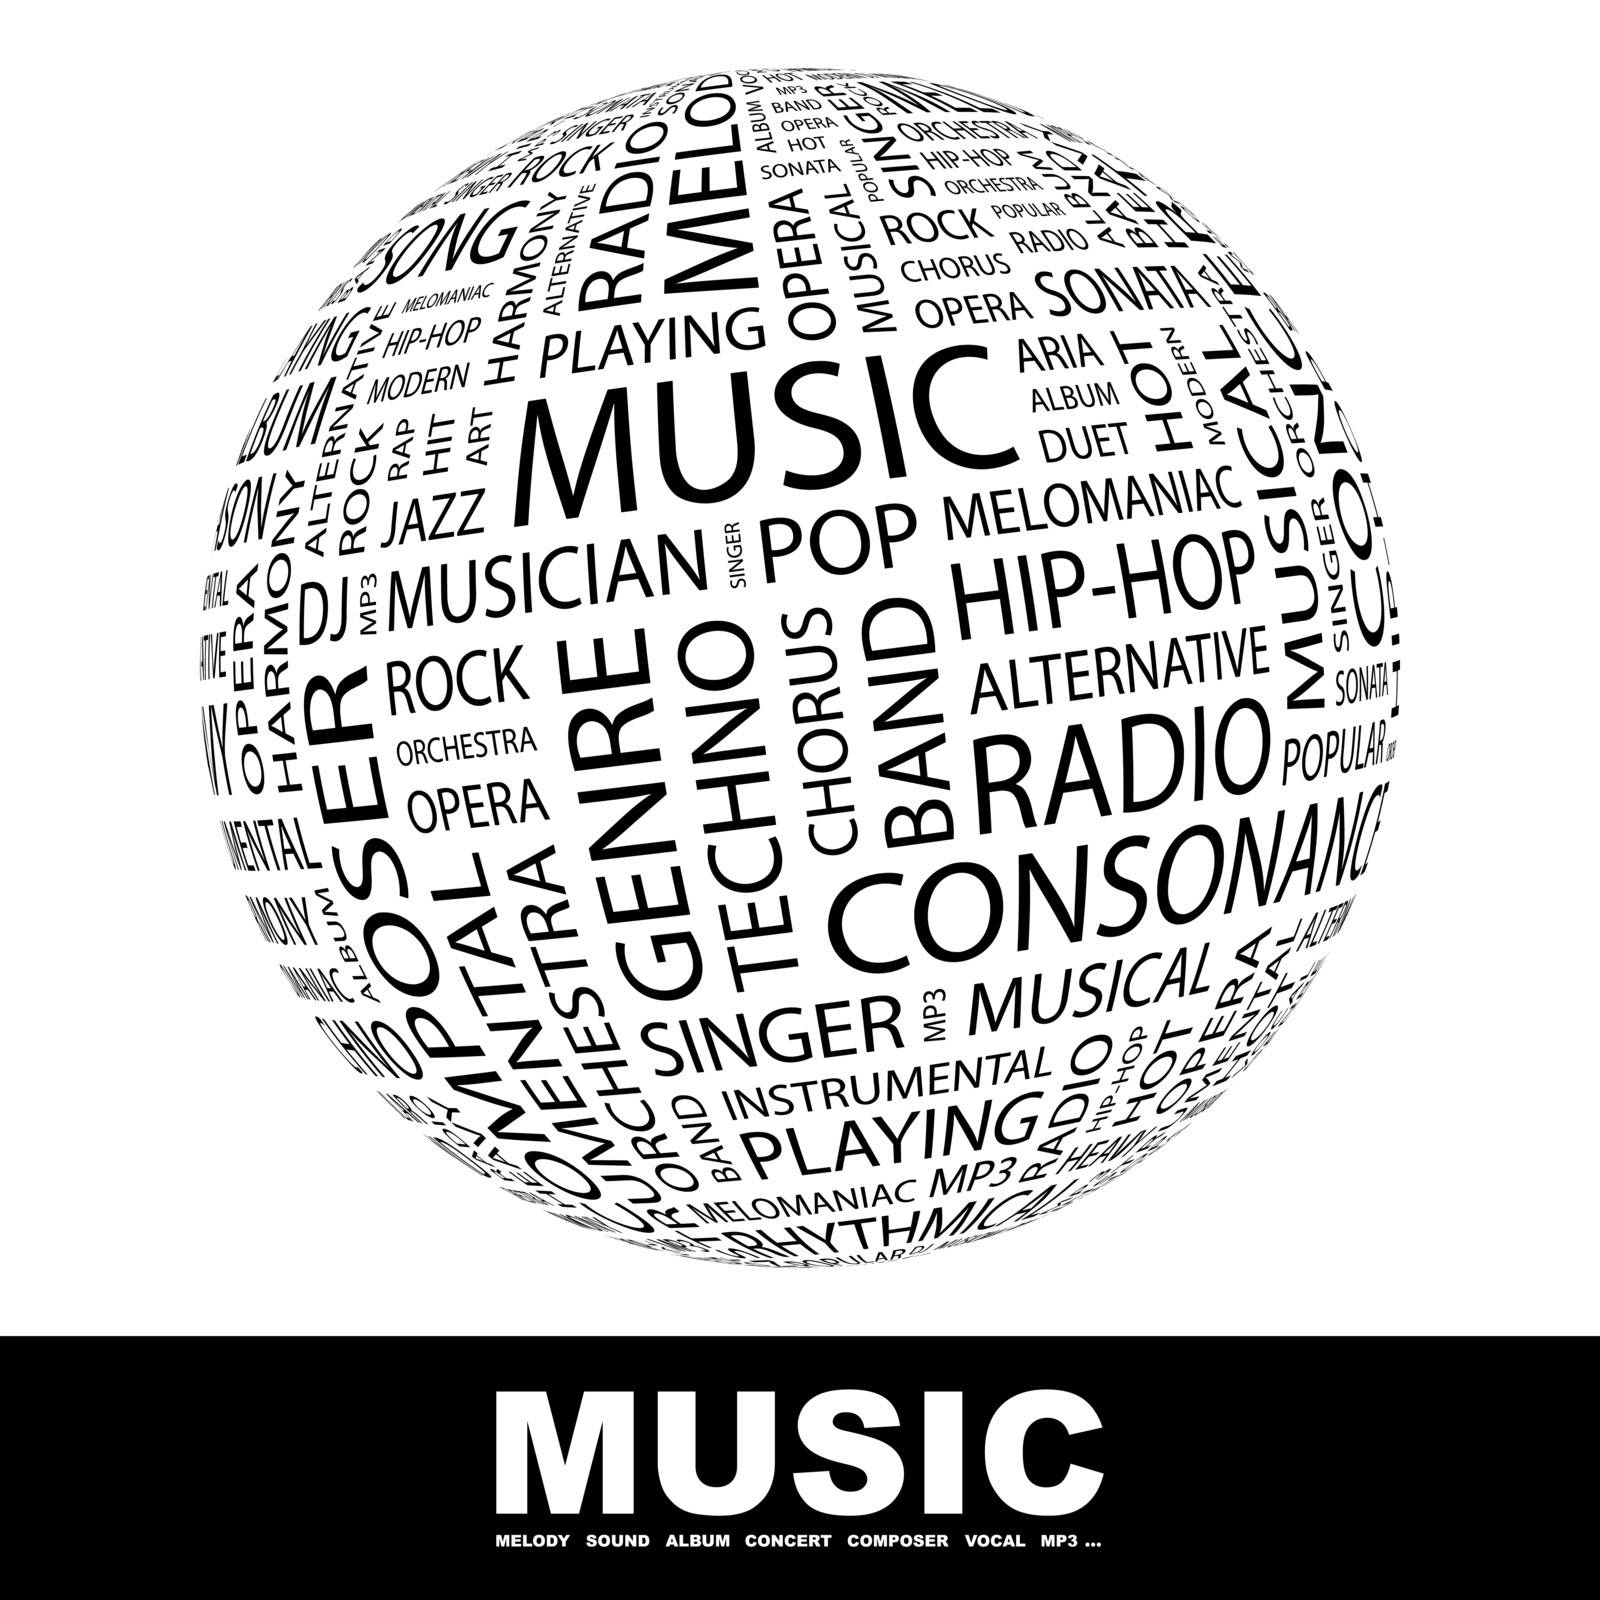 MUSIC. Background concept wordcloud illustration. Print concept word cloud. Graphic collage.